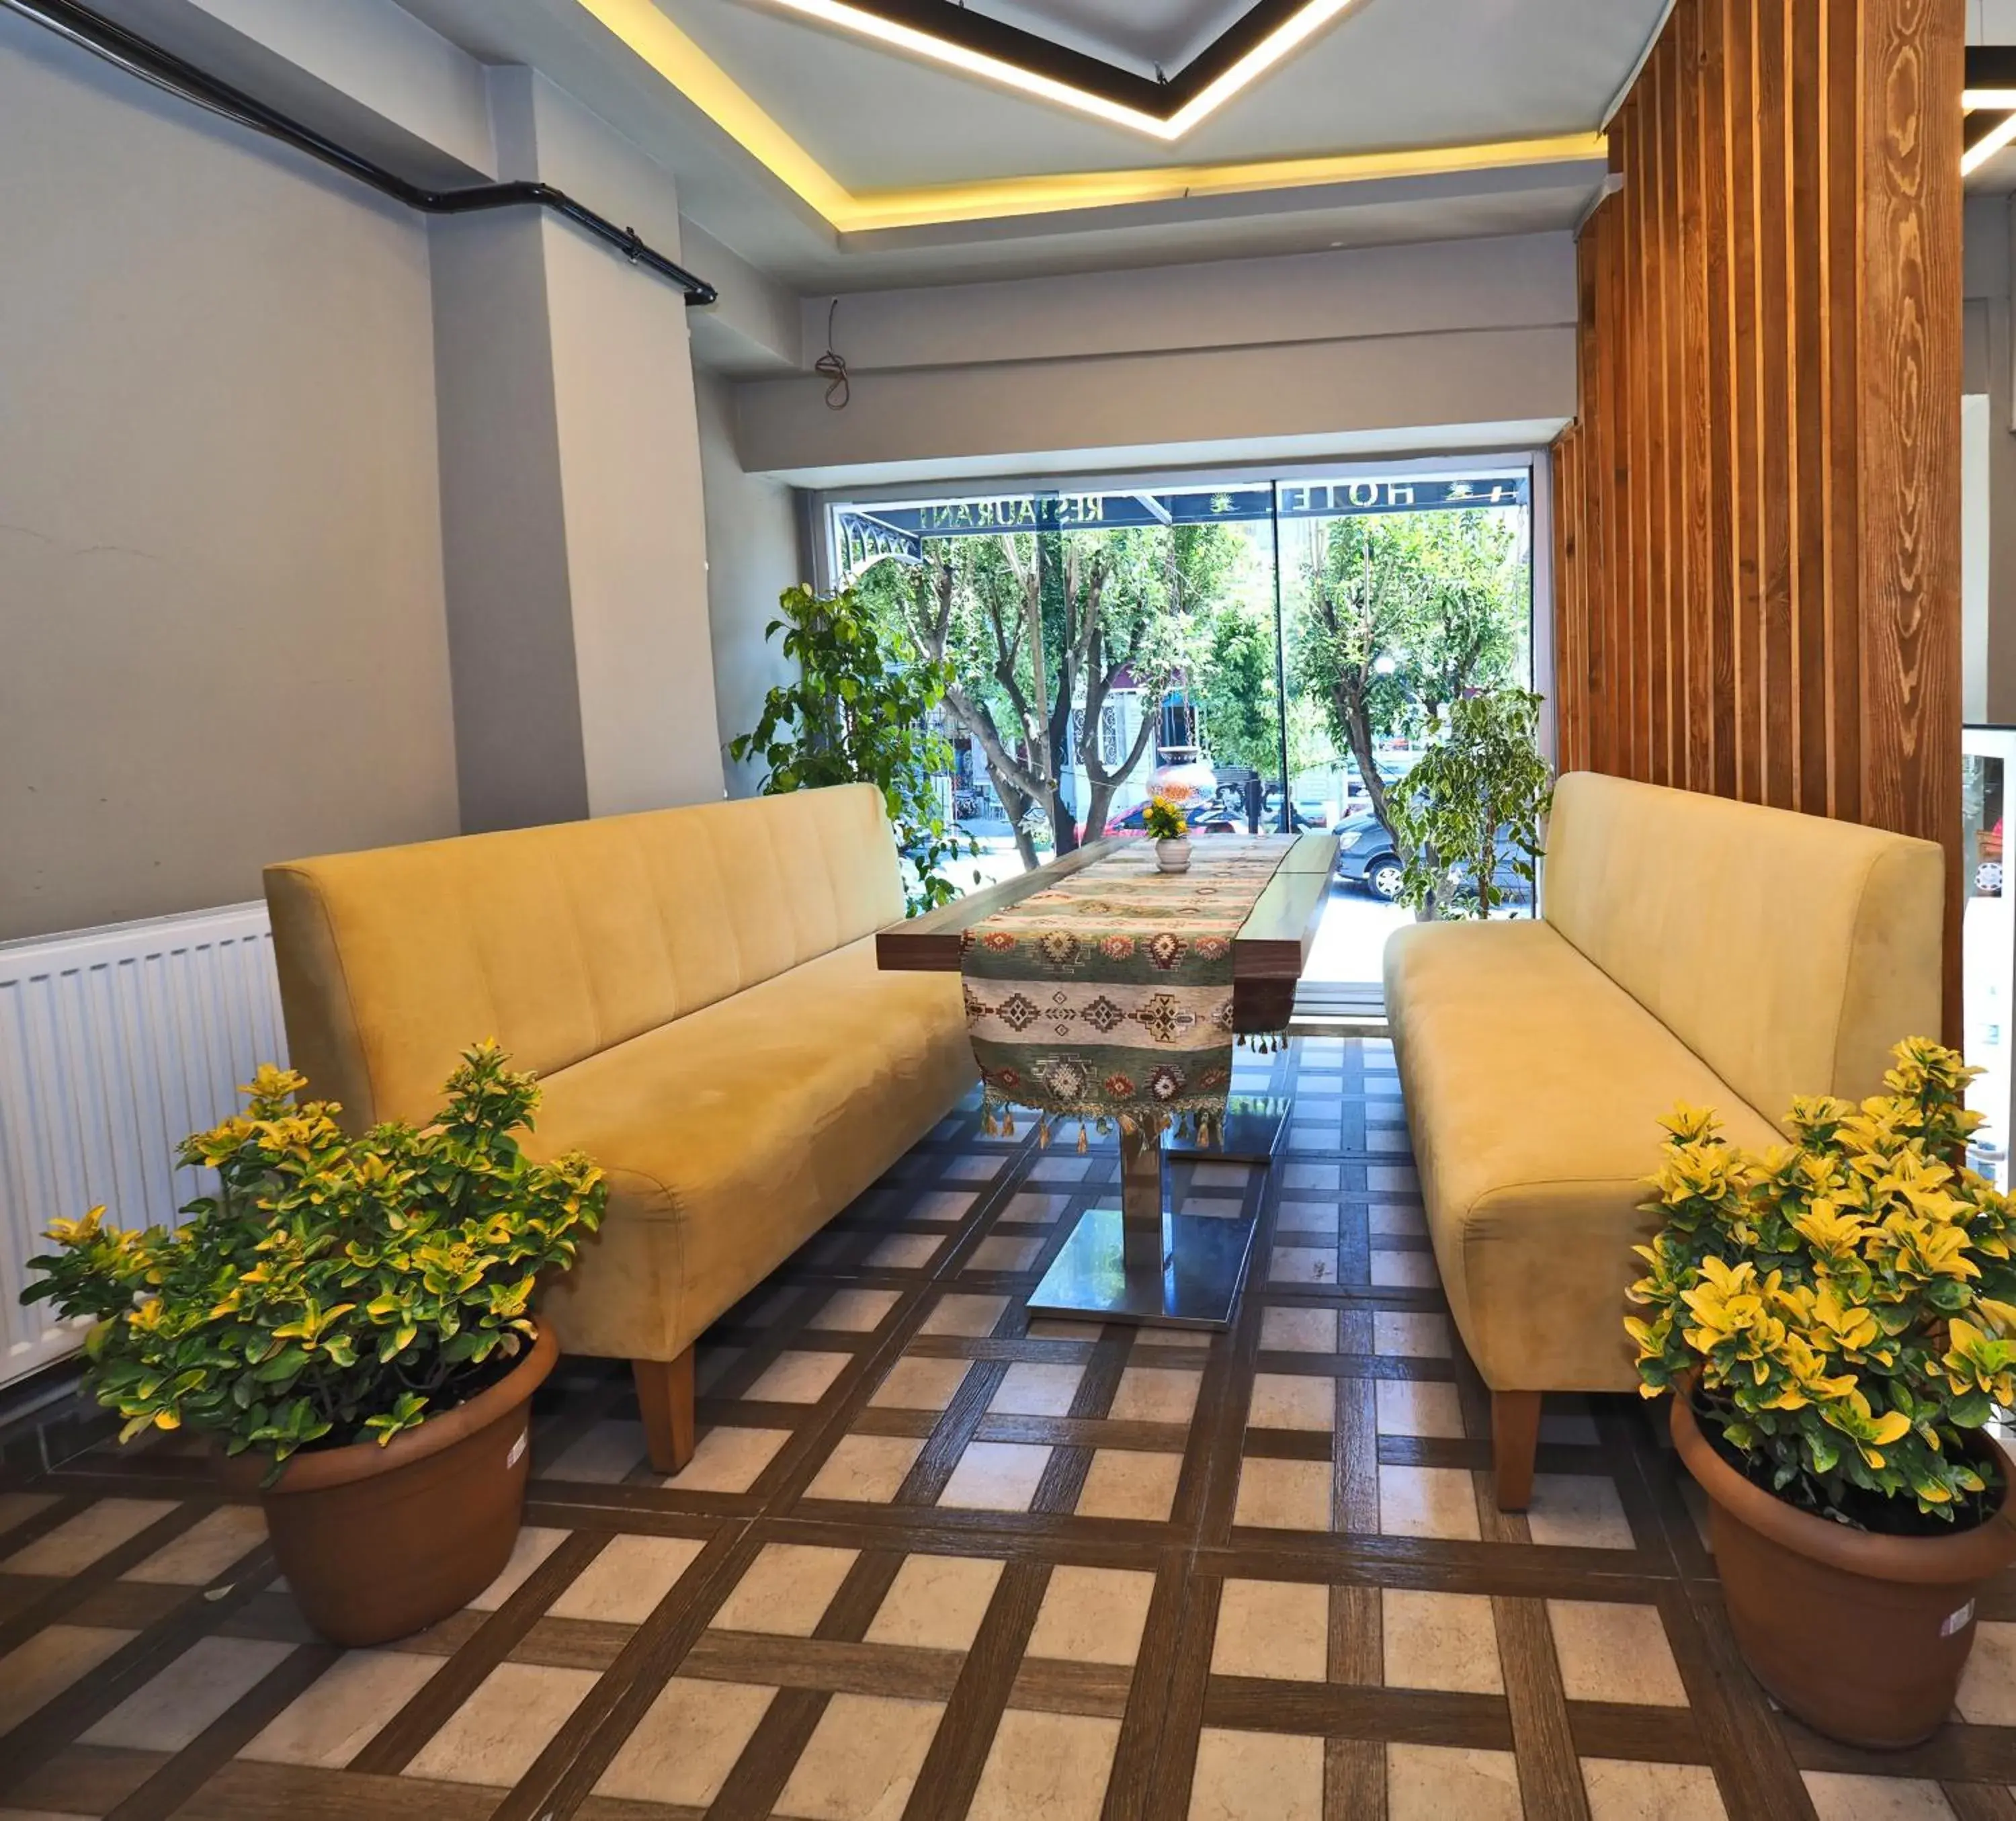 Seating Area in The Sunrise Hotel